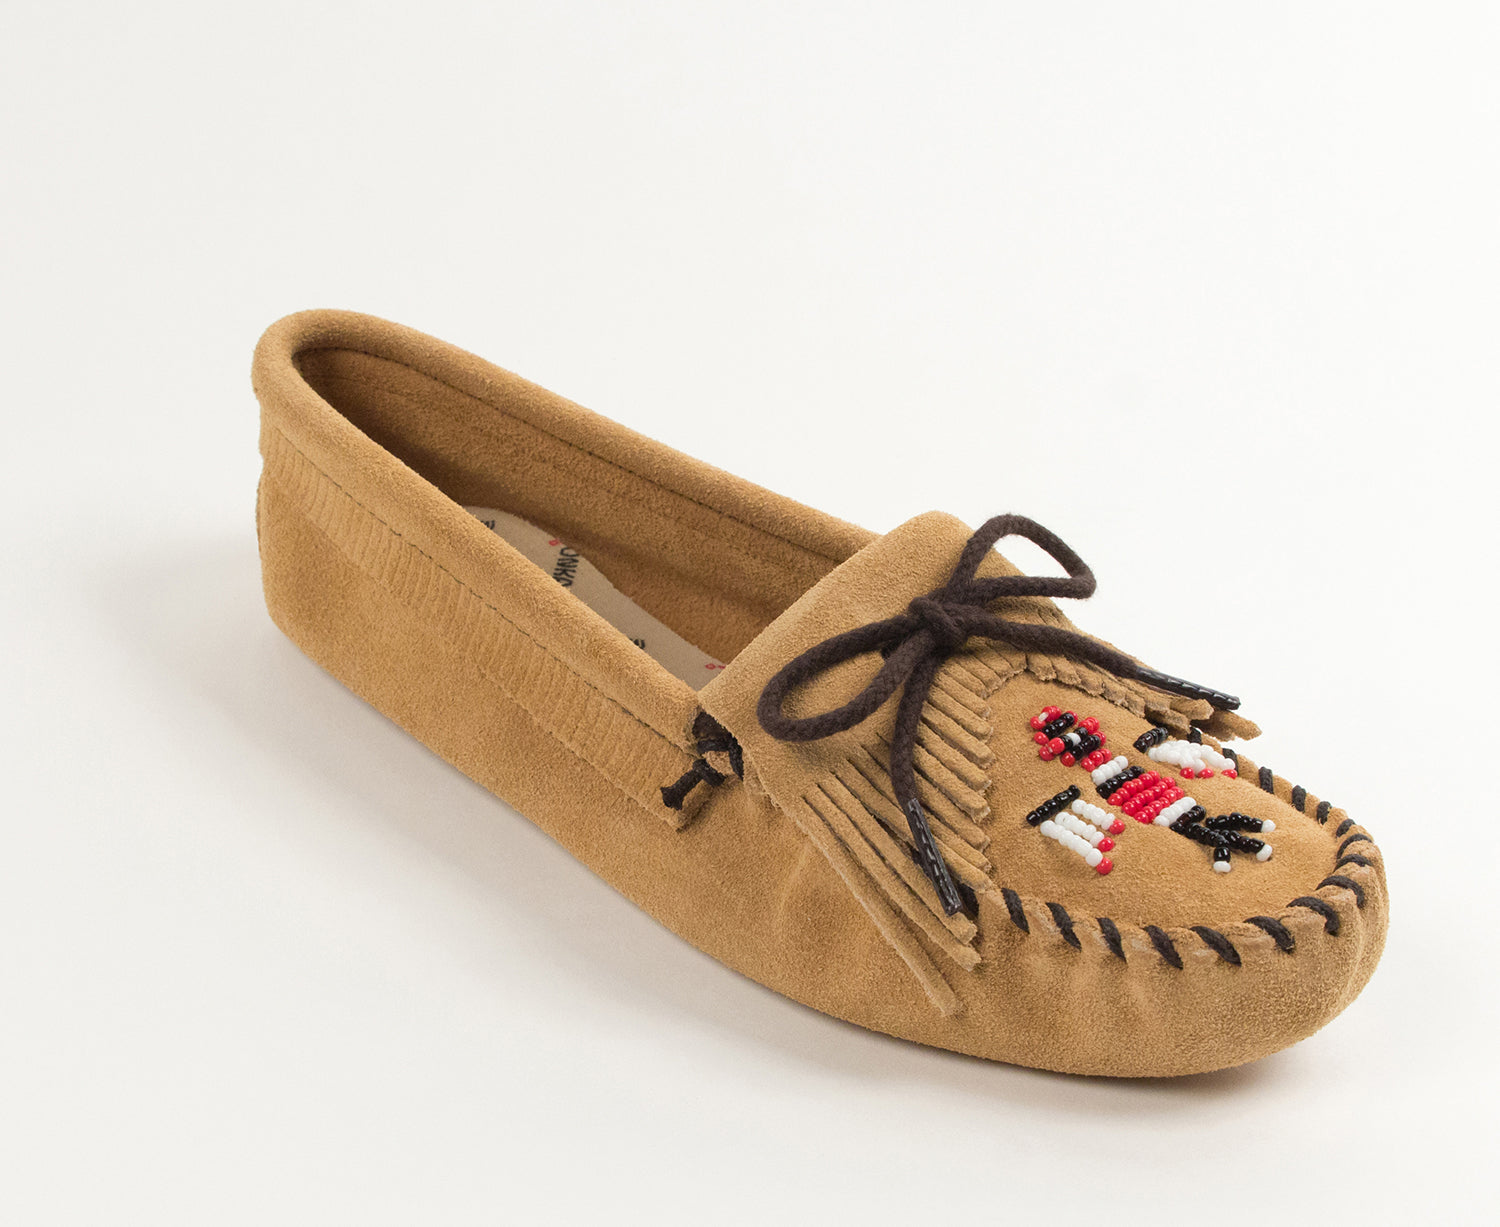 Thunderbird Softsole Moccasin in Tan from 3/4 Angle View